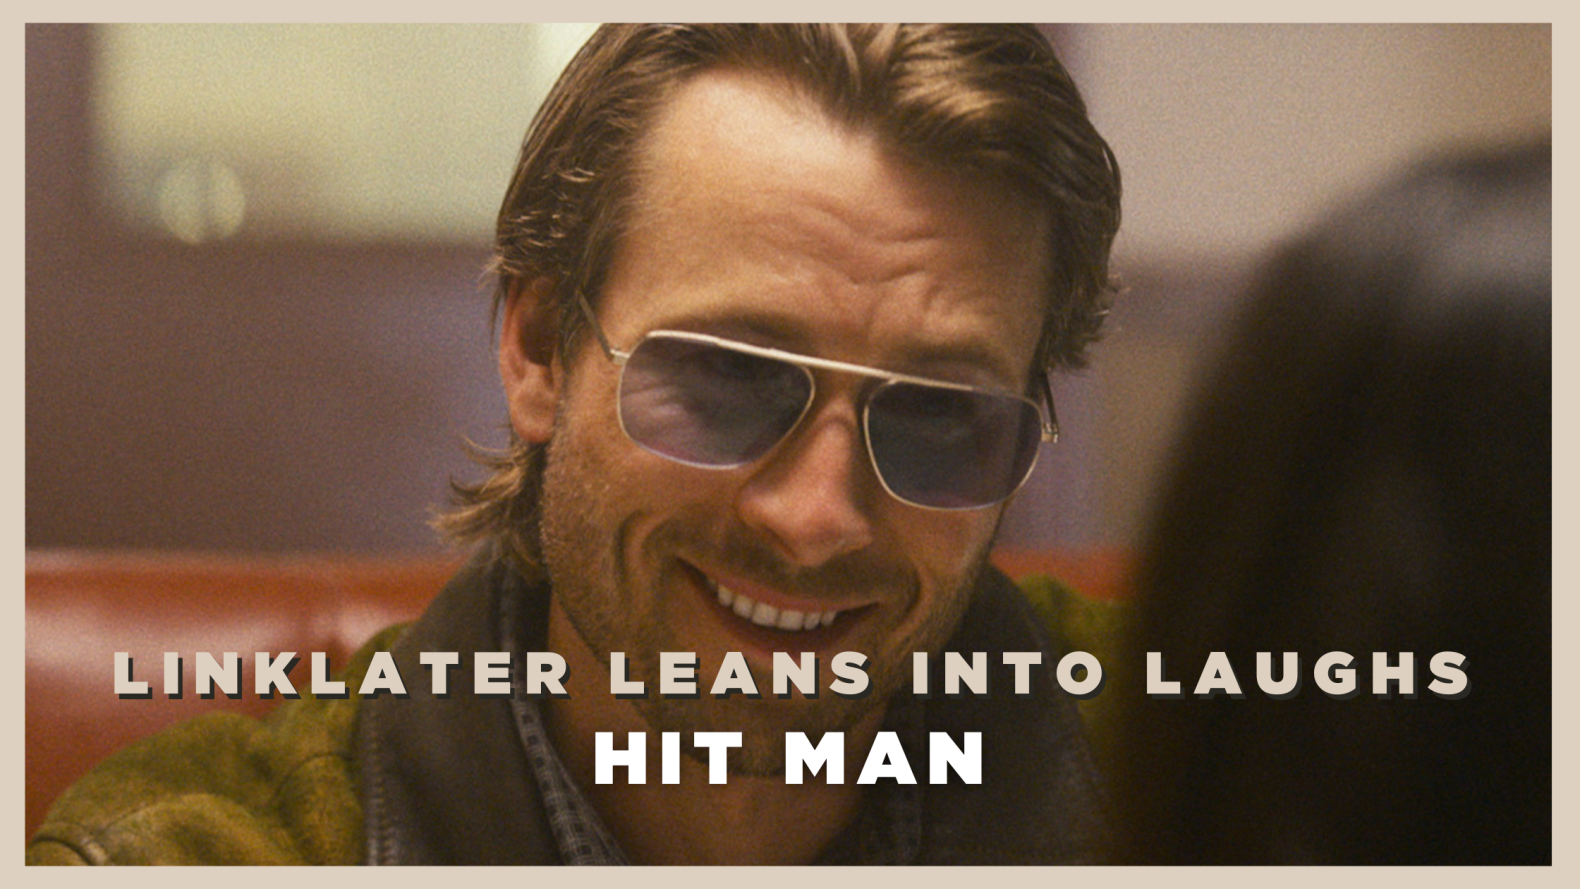 Hit Man - Linklater Leans into Laughs